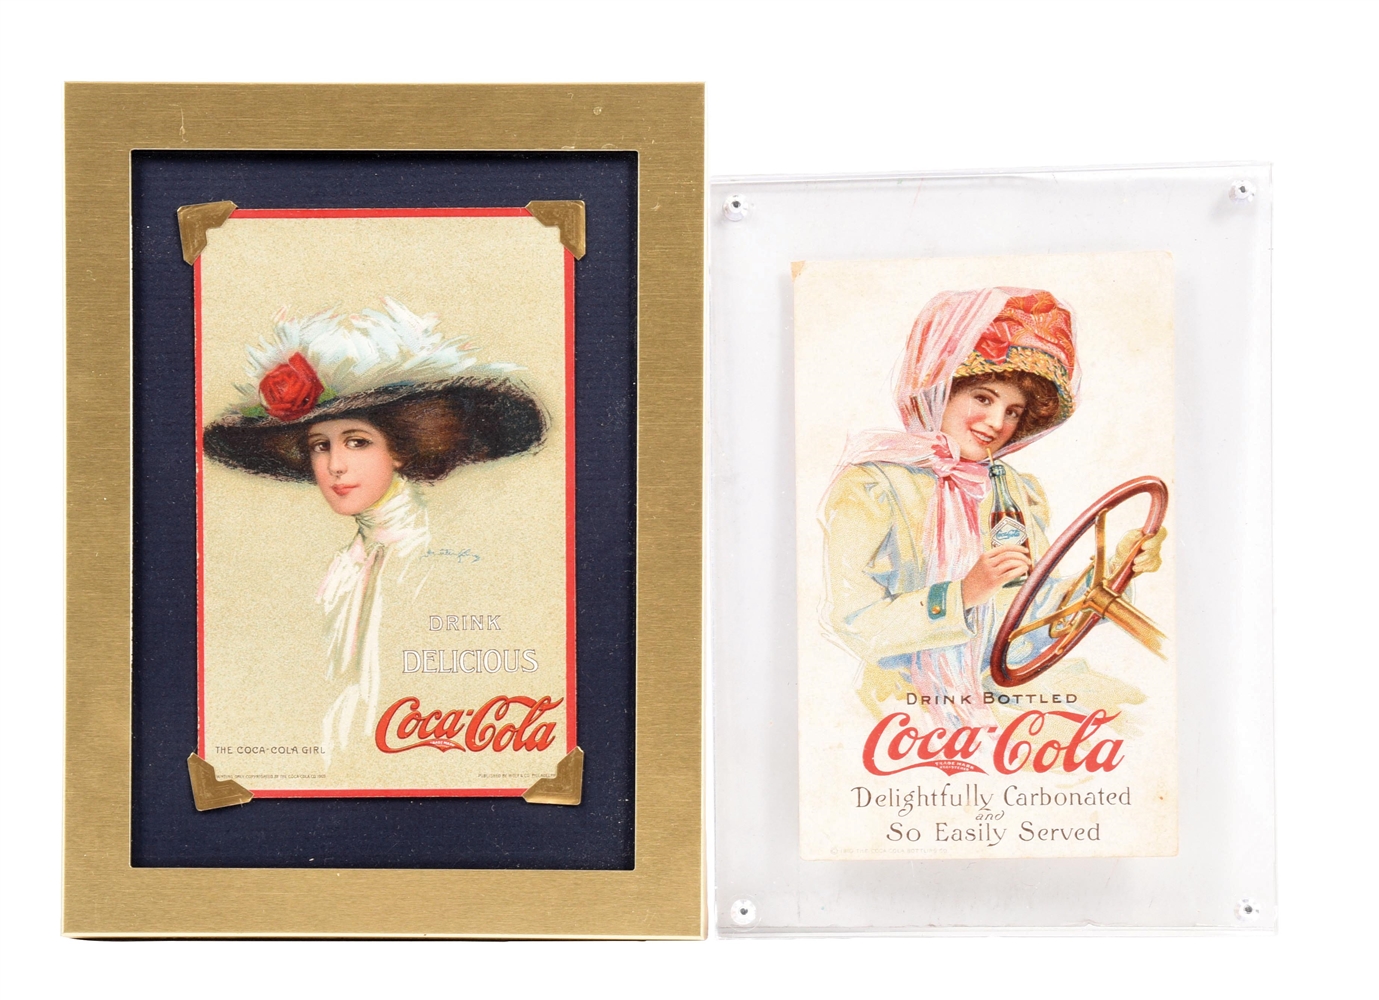 COLLECTION OF 2 COCA-COLA POSTCARDS